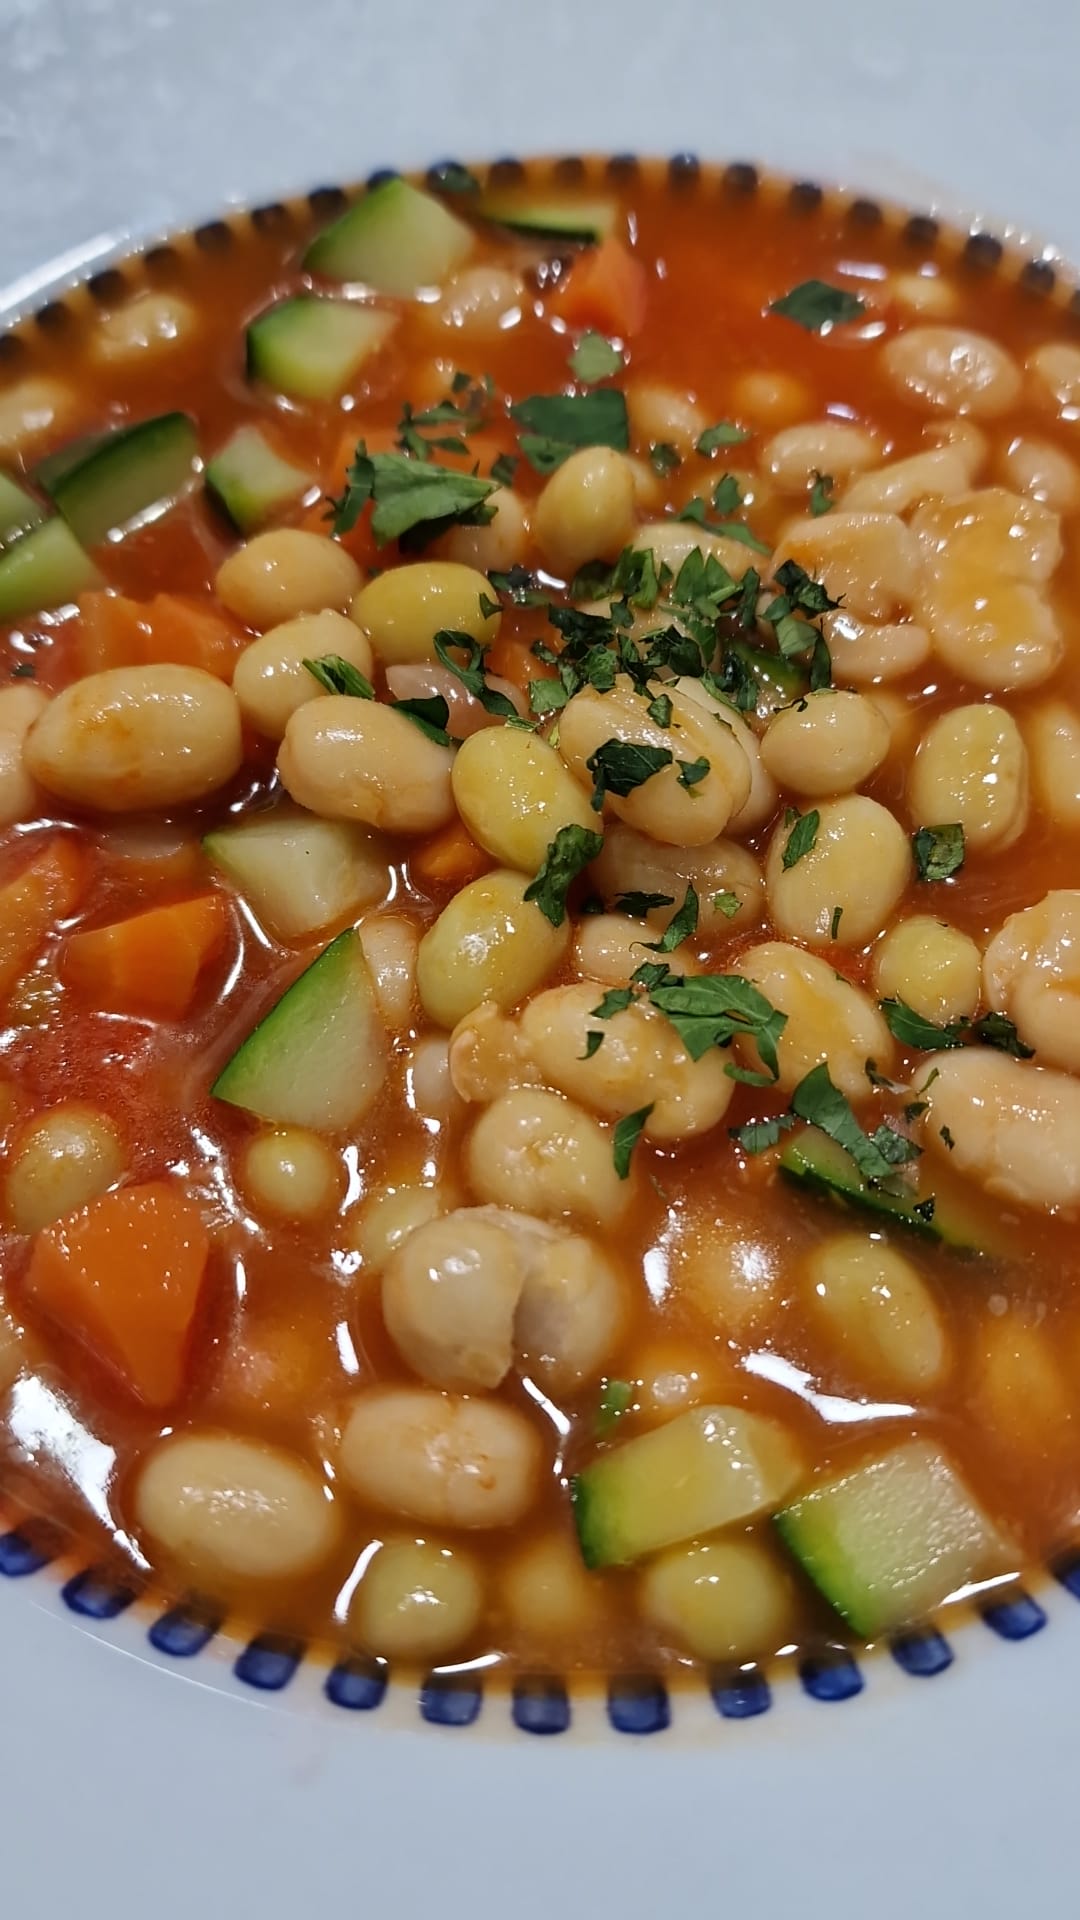 Baked beans with carrots and zucchini